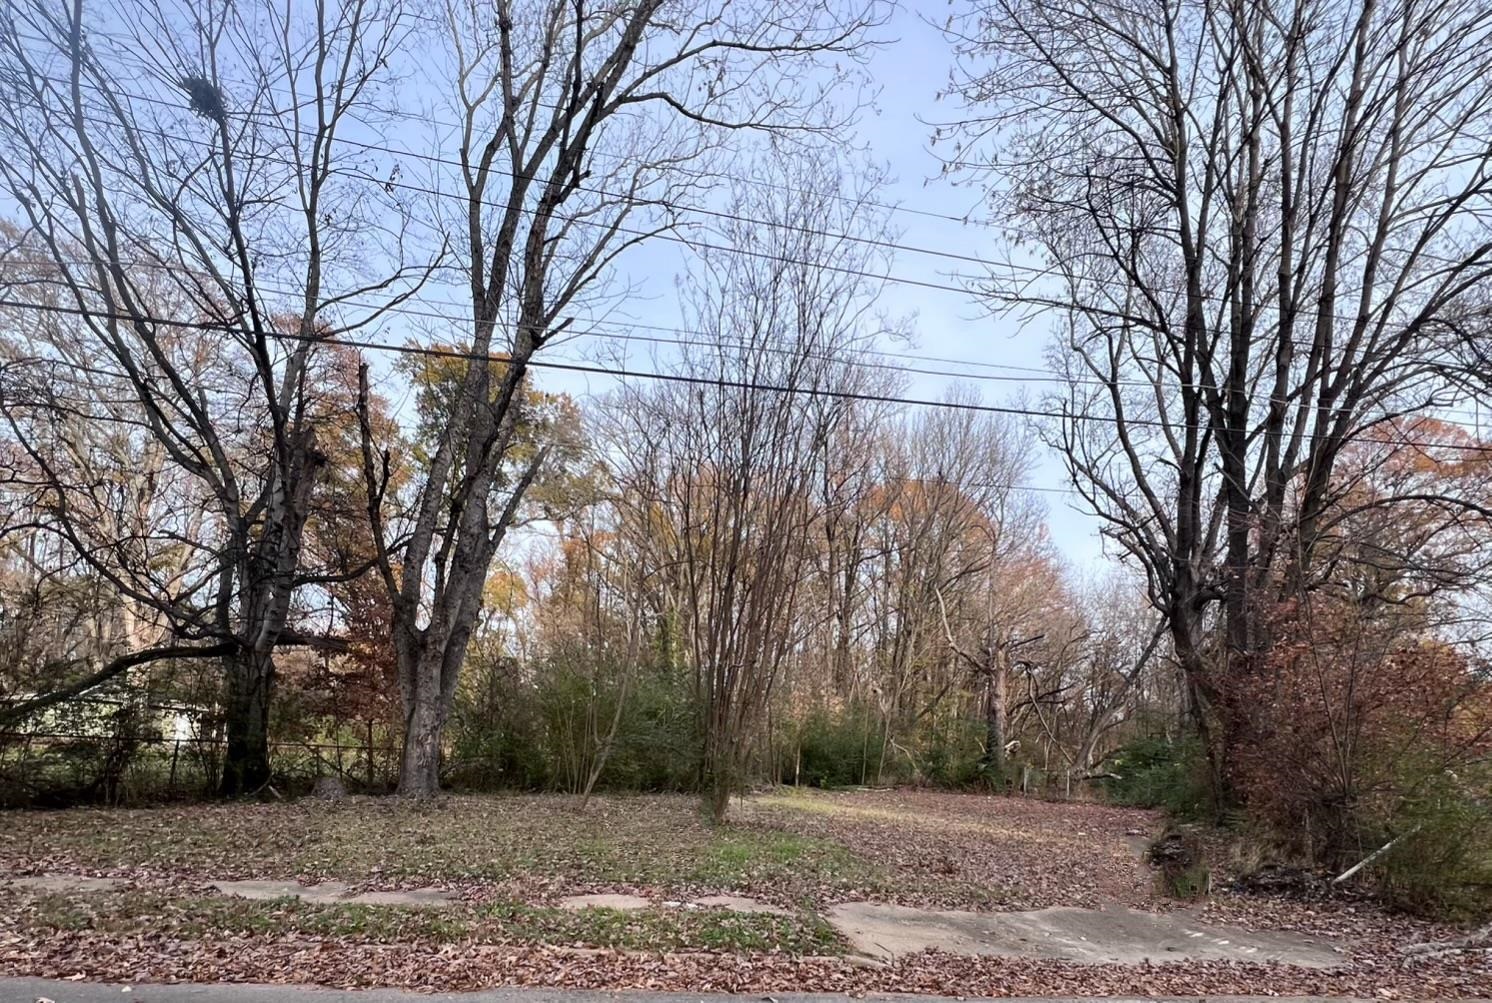 a view of a yard with a house and trees